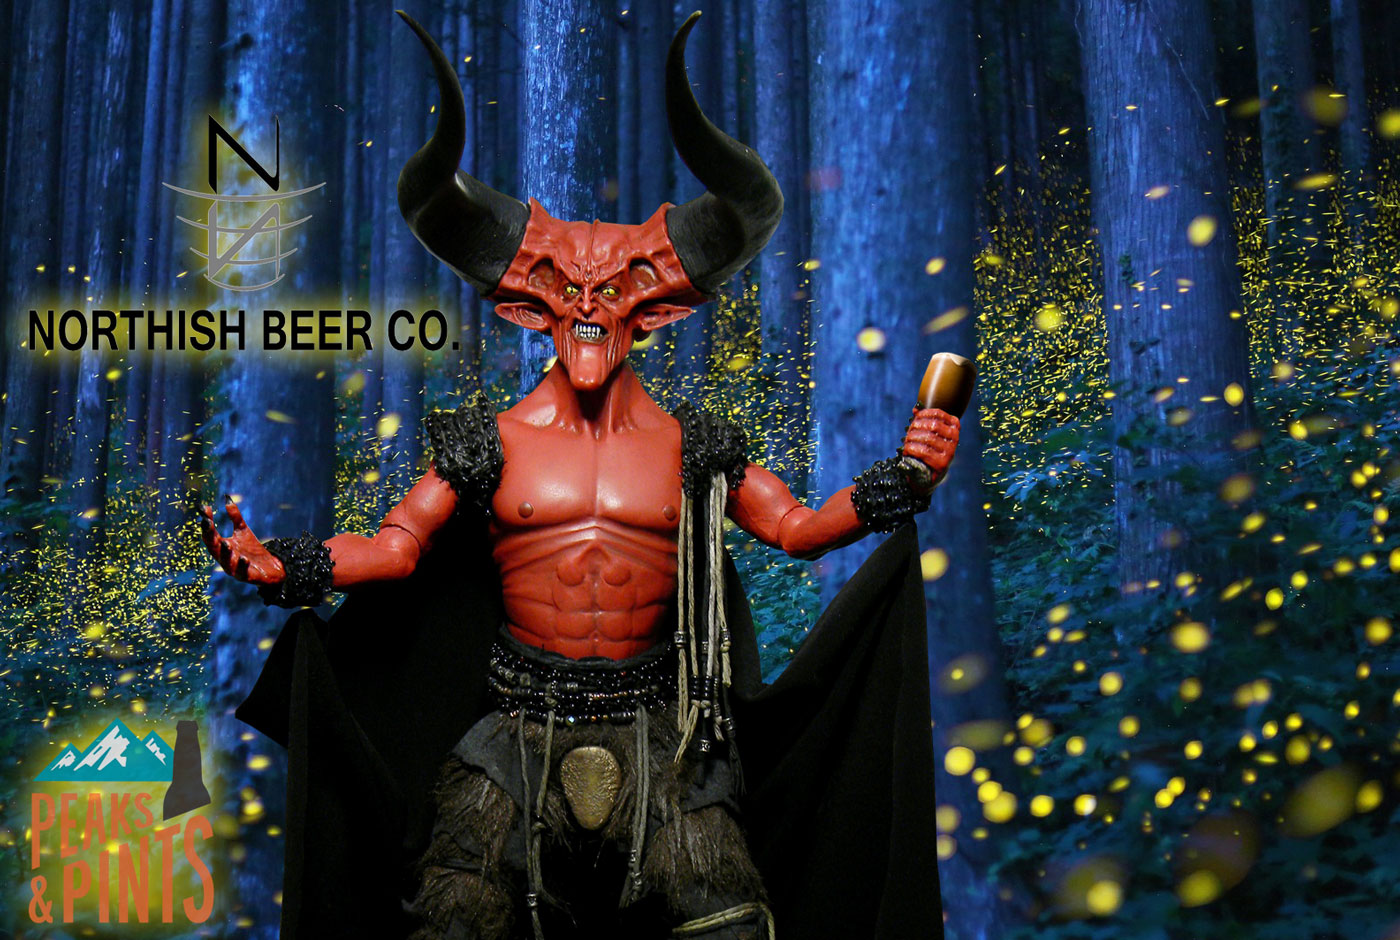 Starring-Northish-Beer-Feat-Tim-Curry-as-The-Darkness-calendar